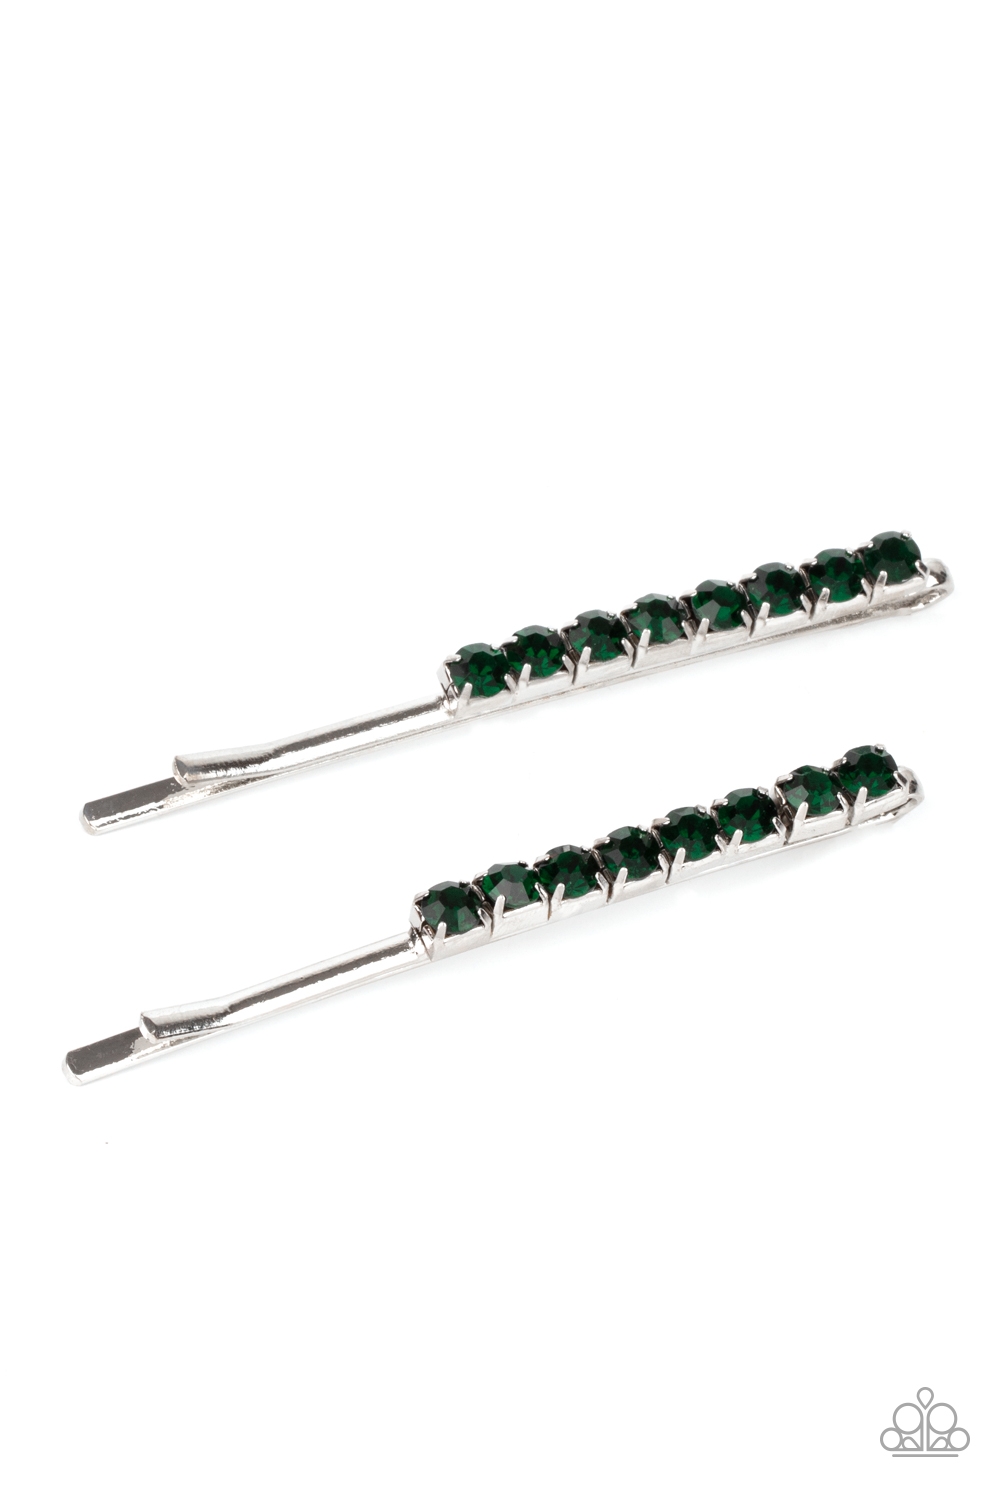 HairClip - Satisfactory Sparkle - Green